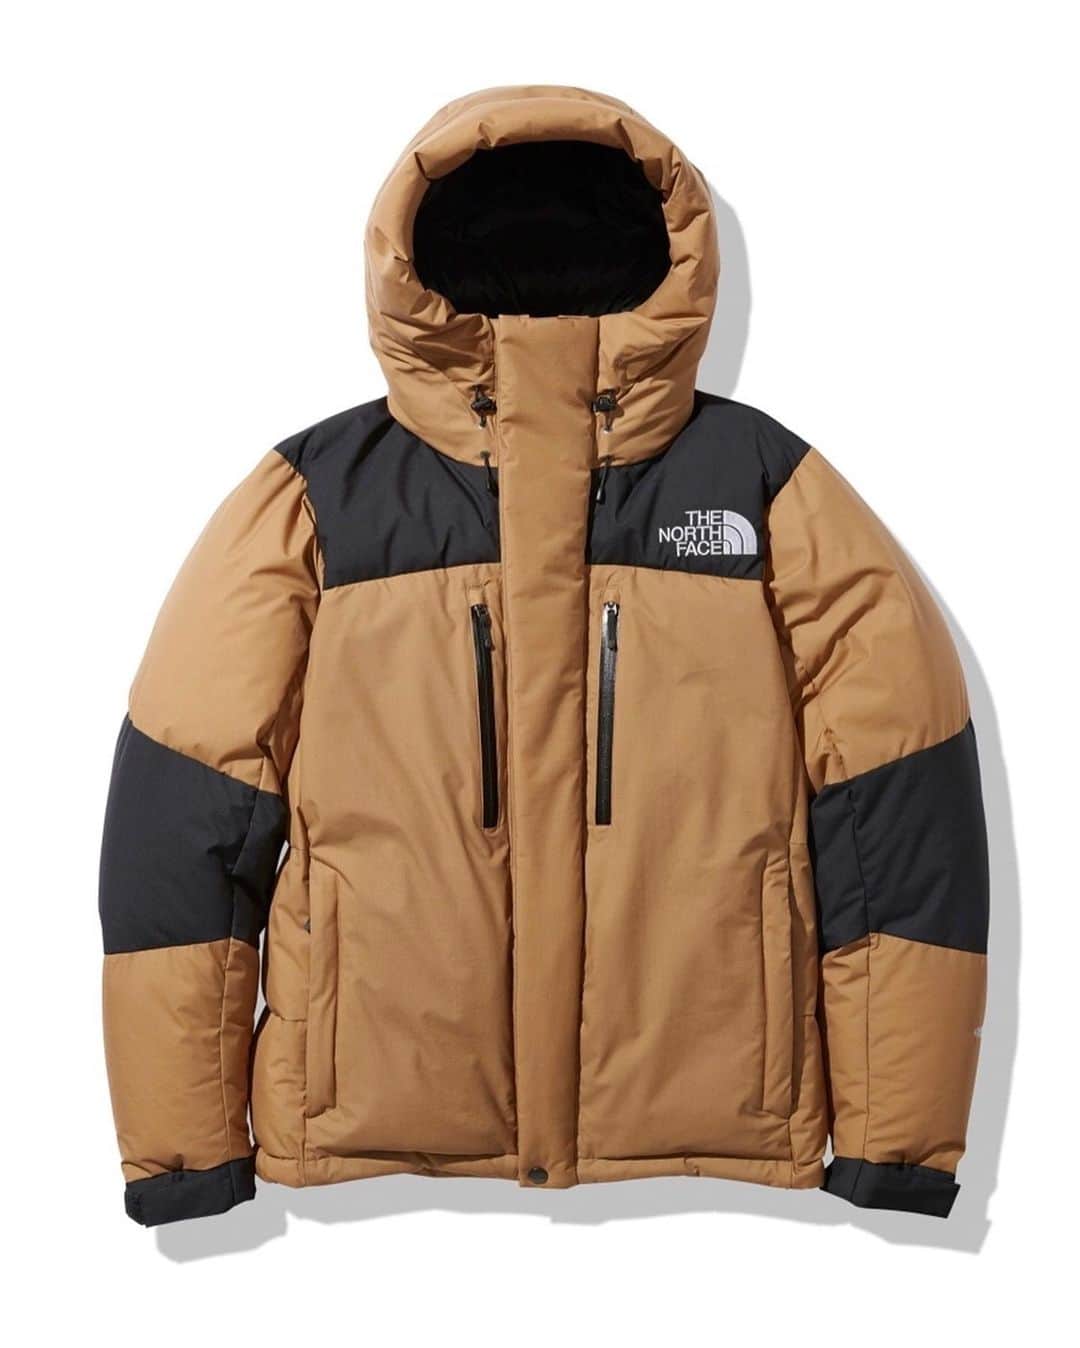 アトモスさんのインスタグラム写真 - (アトモスInstagram)「. 11/7(SAT)より、THE NORTH FACE BALTRO LIGHT JACKET、NOVELTY BALTRO LIGHT JACKETが登場。 真冬の天体観測や雪上ハイクにも対応できる、高い保温性を持つ防寒ジャケット。中わたには、特殊セラミックスの遠赤外線効果により優れた保温効果が持続する光電子©ダウンを封入。高度な洗浄技術により、汚れを徹底的に除去したクリーンなダウンが高い保温性を確保します。表生地には30デニールのWINDSTOPPER©2層構造を使用。防風性とともに耐水性もあり、雪や小雨程度の濡れを遮ります。中わた入りの内襟や前ファスナーのダブルフラップなどでコールドスポットを徹底的に排除。携行に便利なスタッフサック付きです。 . ※詳しくはatmos-tokyo.com、RELEASE INFOをご覧下さい。 . A winter jacket with high heat retention that can be used for astronomical observations in the middle of winter and hike on snow. The inner padding is filled with photoelectron © down, which maintains an excellent heat retention effect due to the far-infrared effect of special ceramics. With advanced cleaning technology, clean down that thoroughly removes dirt ensures high heat retention. 30 denier WINDSTOPPER © 2-layer structure is used for the outer fabric. It is windproof and water resistant, and blocks the wetness of snow and light rain. Cold spots are thoroughly eliminated with an inner collar with a lining and a double flap on the front zipper. Comes with a staff sack that is convenient to carry. . *For about informations, please check on atmos-tokyo.com and RELEASE INFO. . #atmos #atmostokyo #atmosjapan #thenorthface #tnf #baltro #baltrolightjacket #アトモス #ノースフェイス #バルトロ」11月5日 20時17分 - atmos_japan